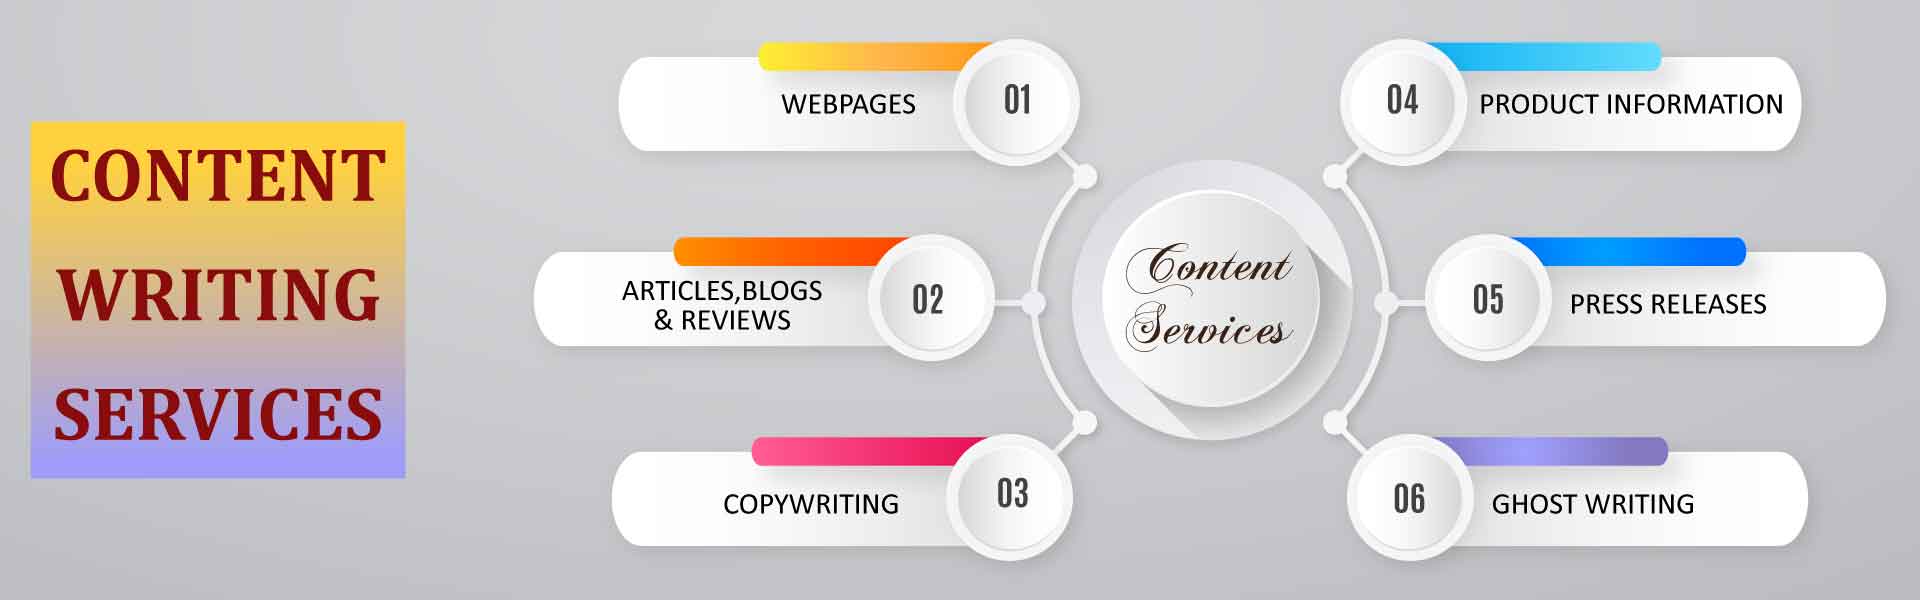 Best Content Writing Services For Websites